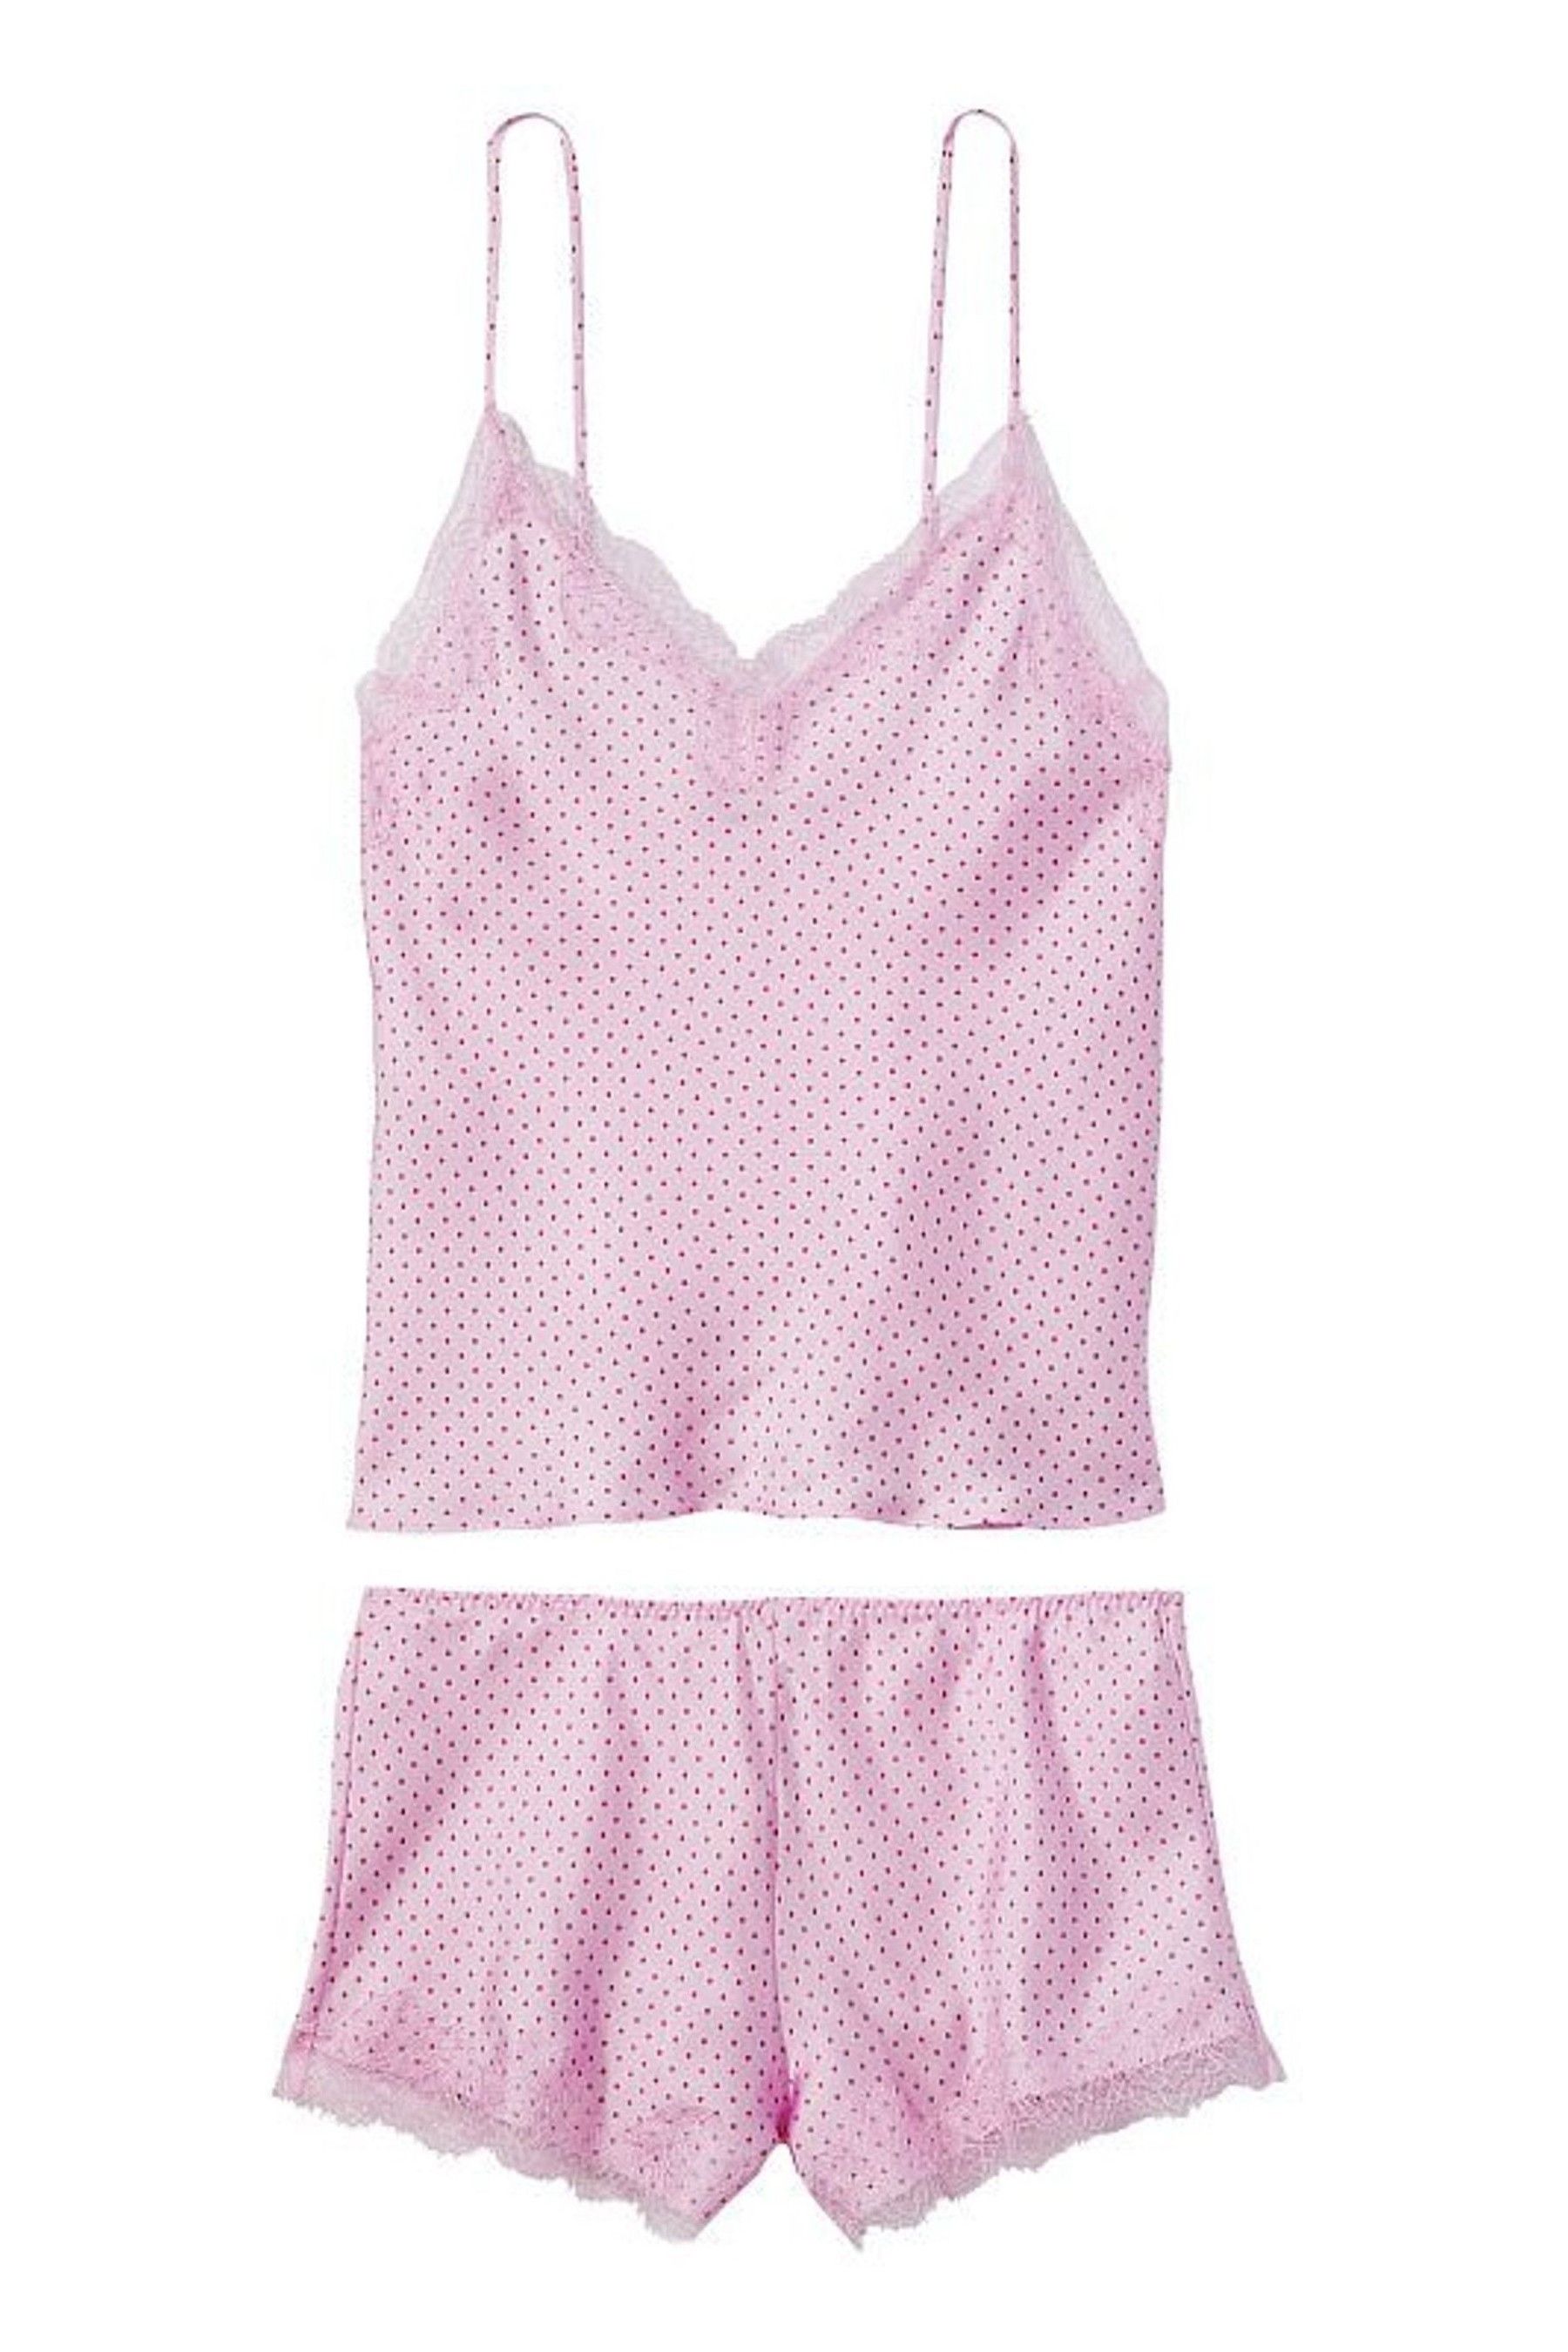 Buy Victoria's Secret Babydoll Pink Dot Satin Lace Cami Set from the ...